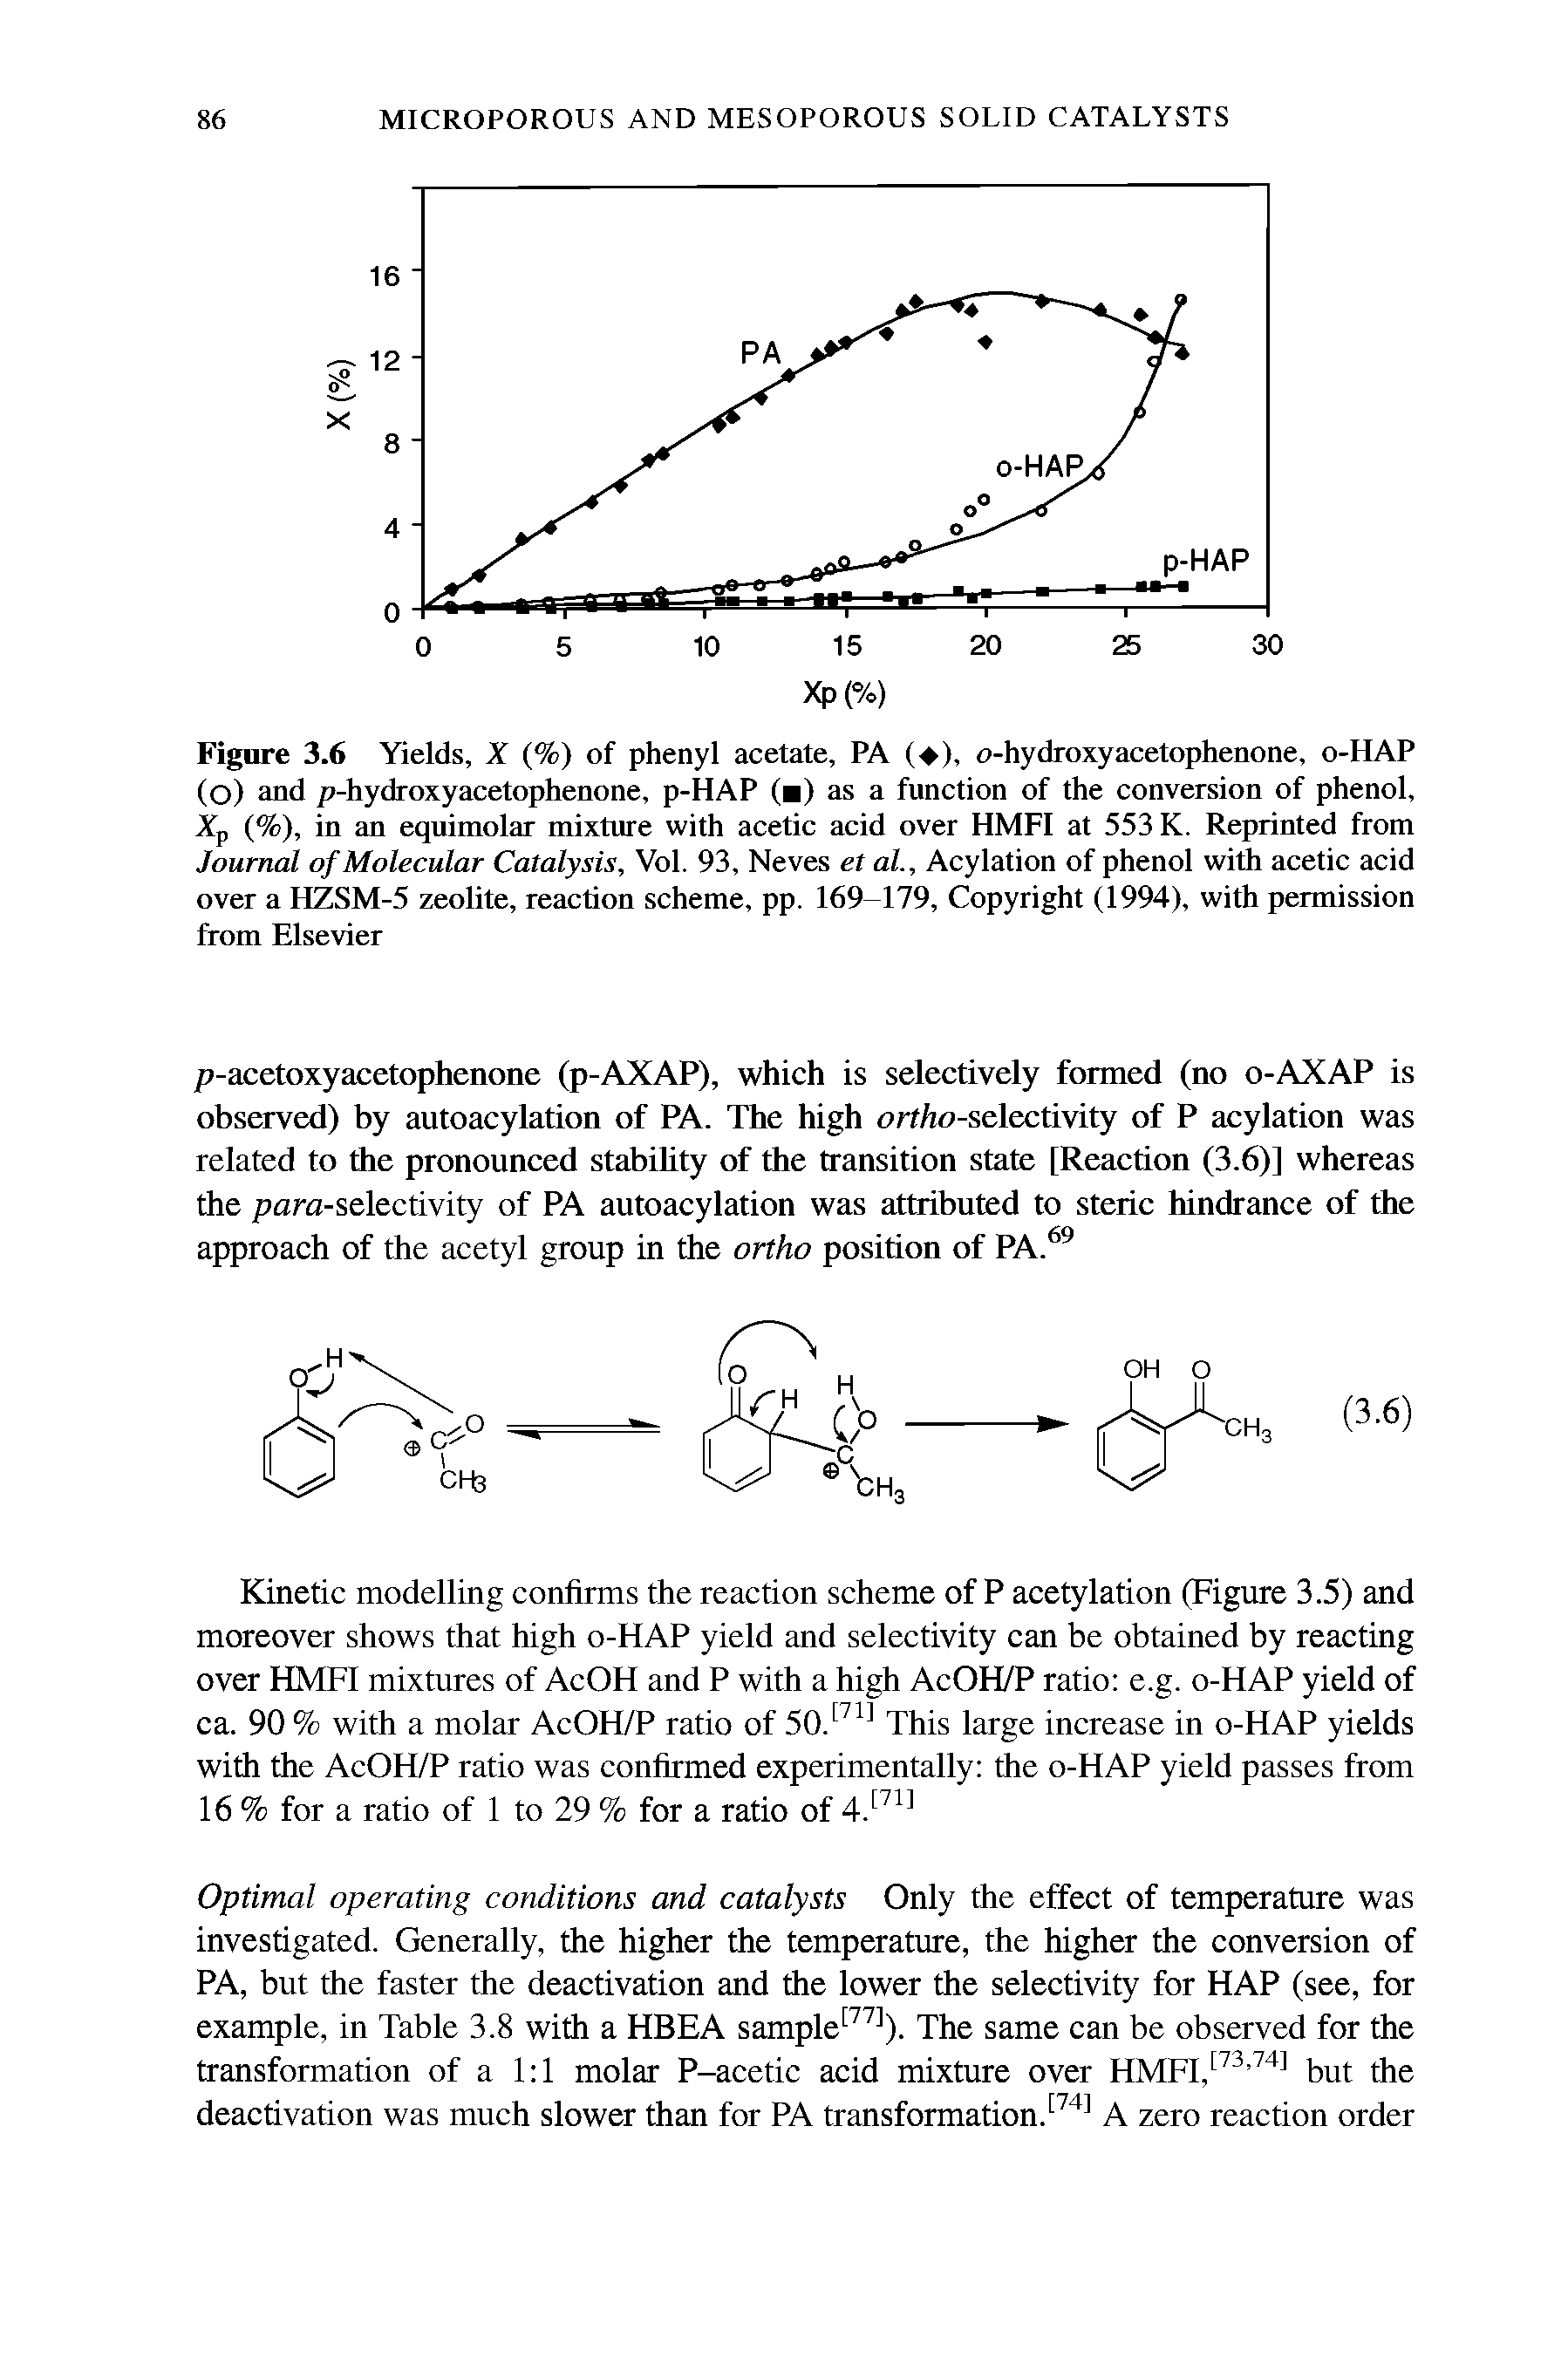 Figure 3.6 Yields, X (%) of phenyl acetate, PA ( ), o-hydroxyacetophenone, o-HAP (o) and p-hydroxyacetophenone, p-HAP ( ) as a function of the conversion of phenol, Xp (%), in an equimolar mixture with acetic acid over HMFI at 553 K. Reprinted from Journal of Molecular Catalysis, Vol. 93, Neves et al., Acylation of phenol with acetic acid over a HZSM-5 zeolite, reaction scheme, pp. 169-179, Copyright (1994), with permission from Elsevier...